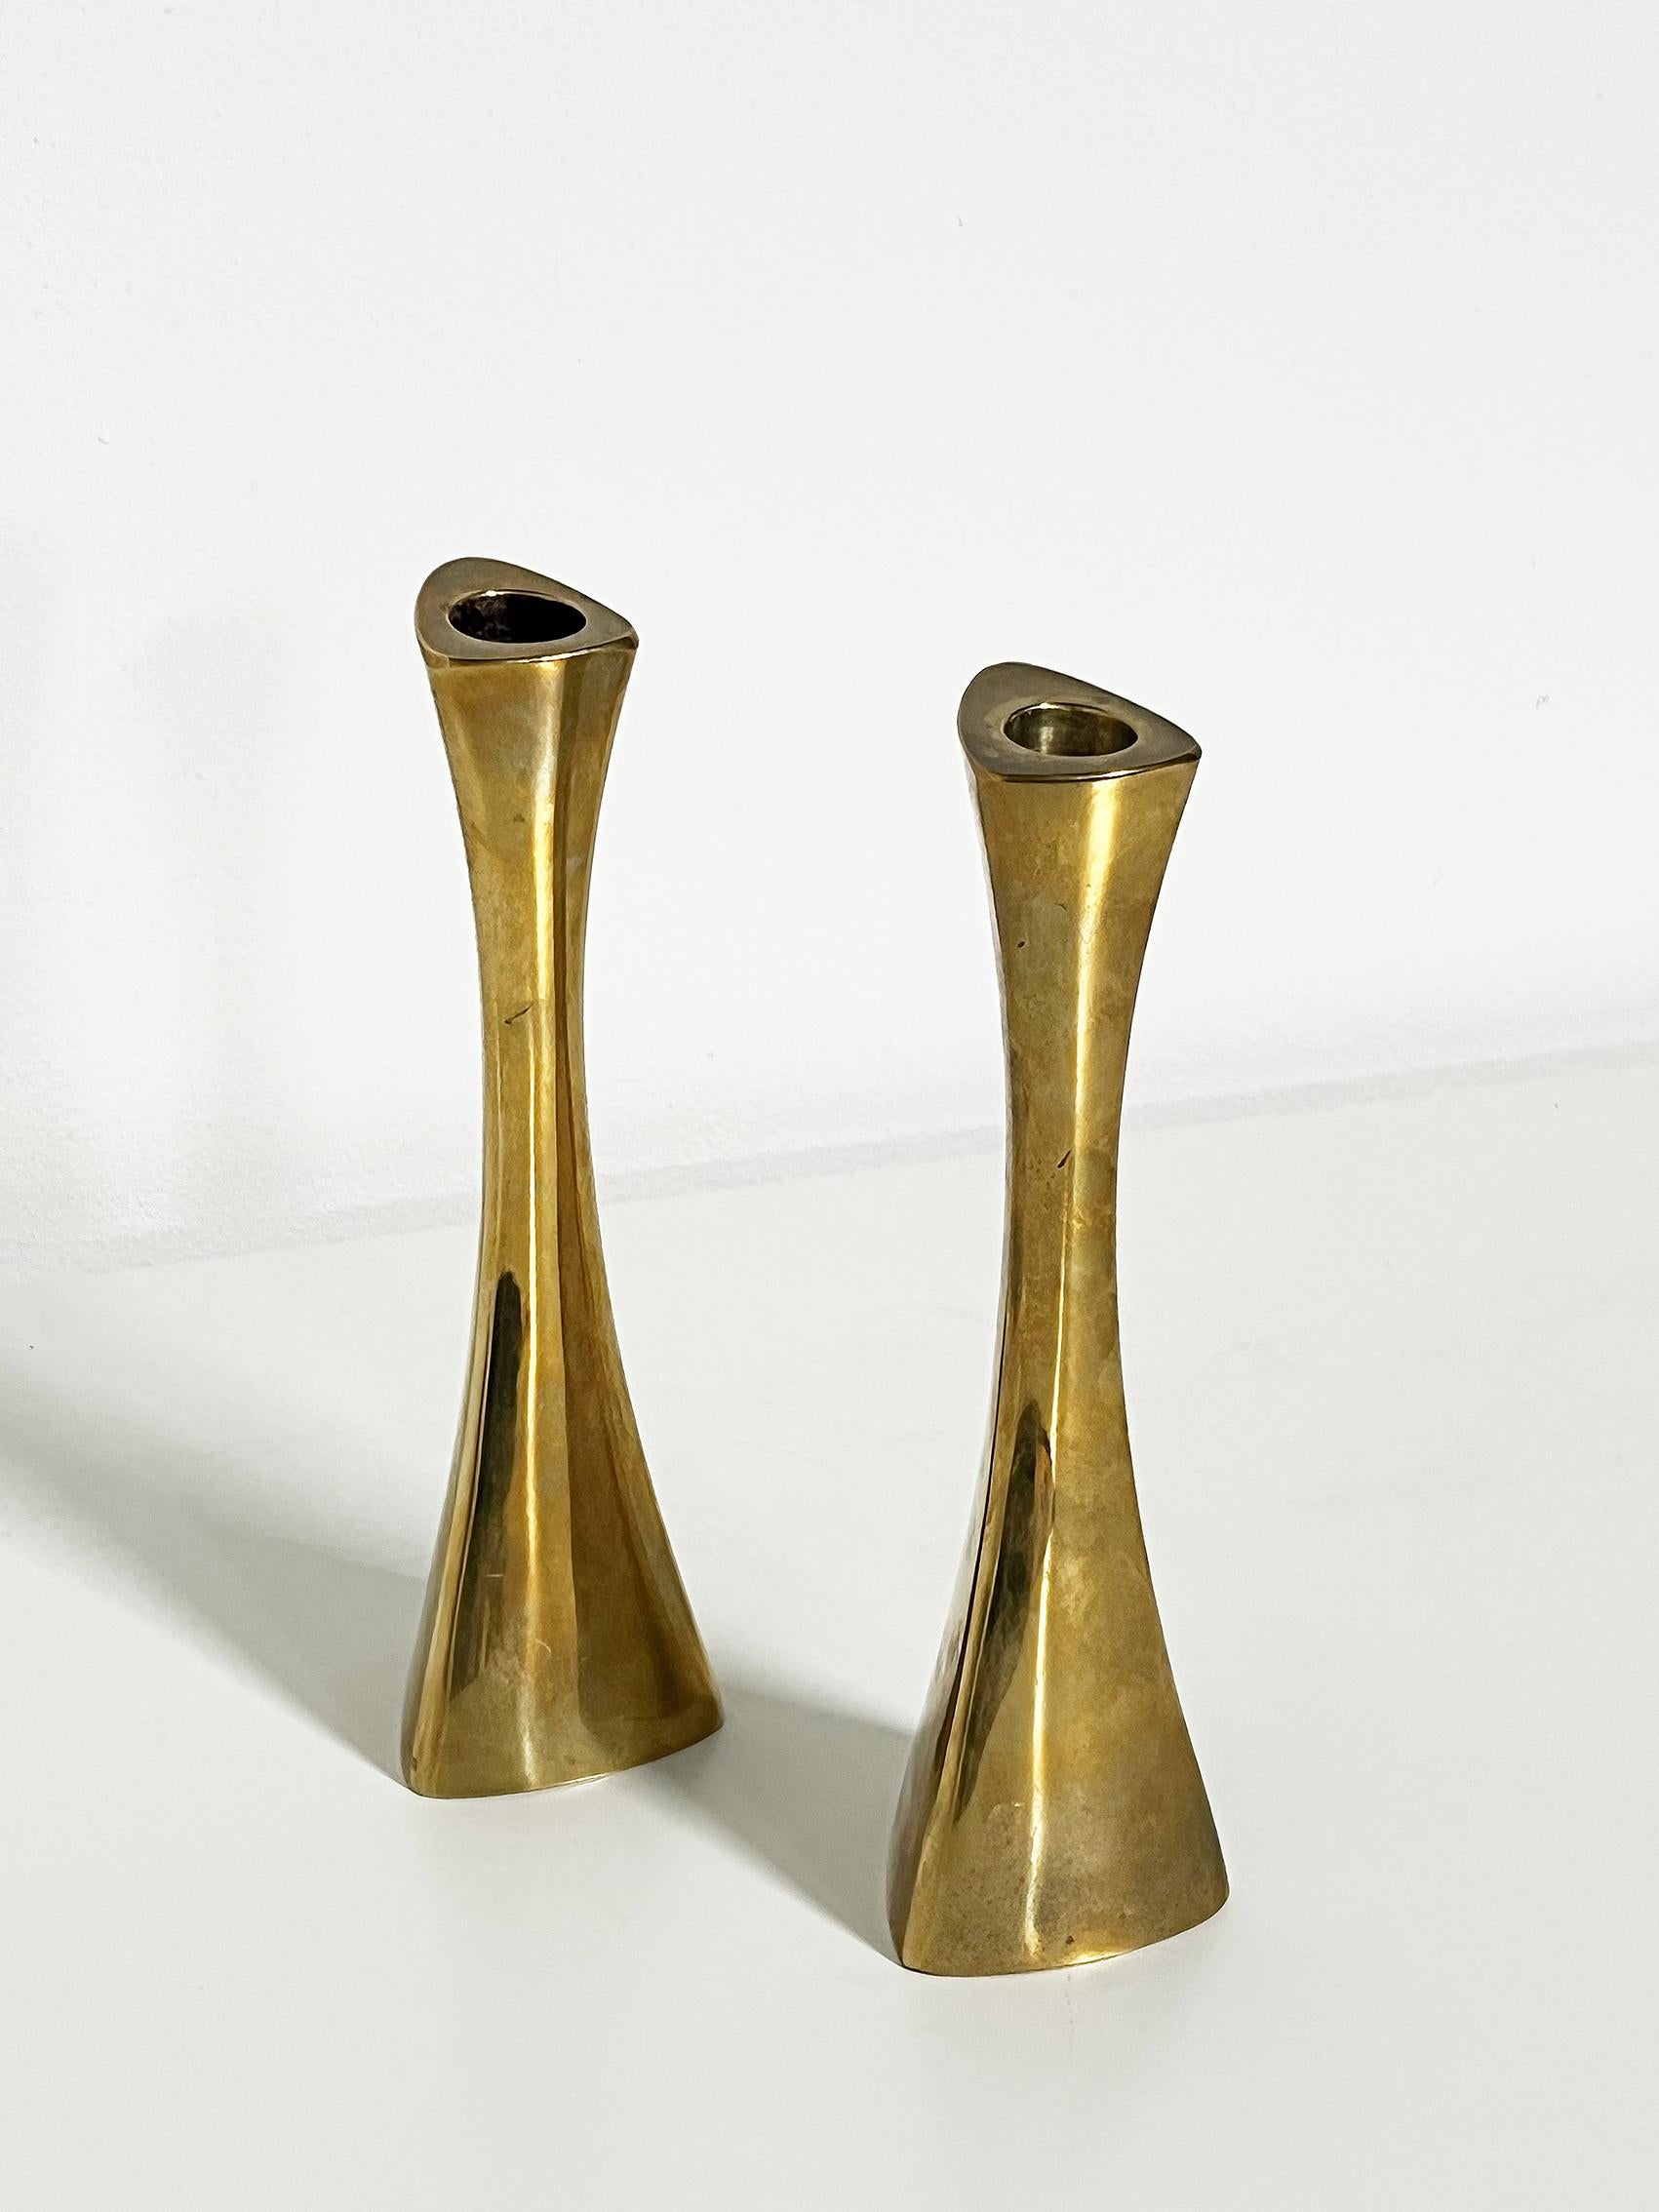 Beautiful, organic shaped candlesticks in brass by K-E Ytterberg for BCA Eskilstuna - 1960's.
Good vintage condition, wear and patina consistent with age and use. 